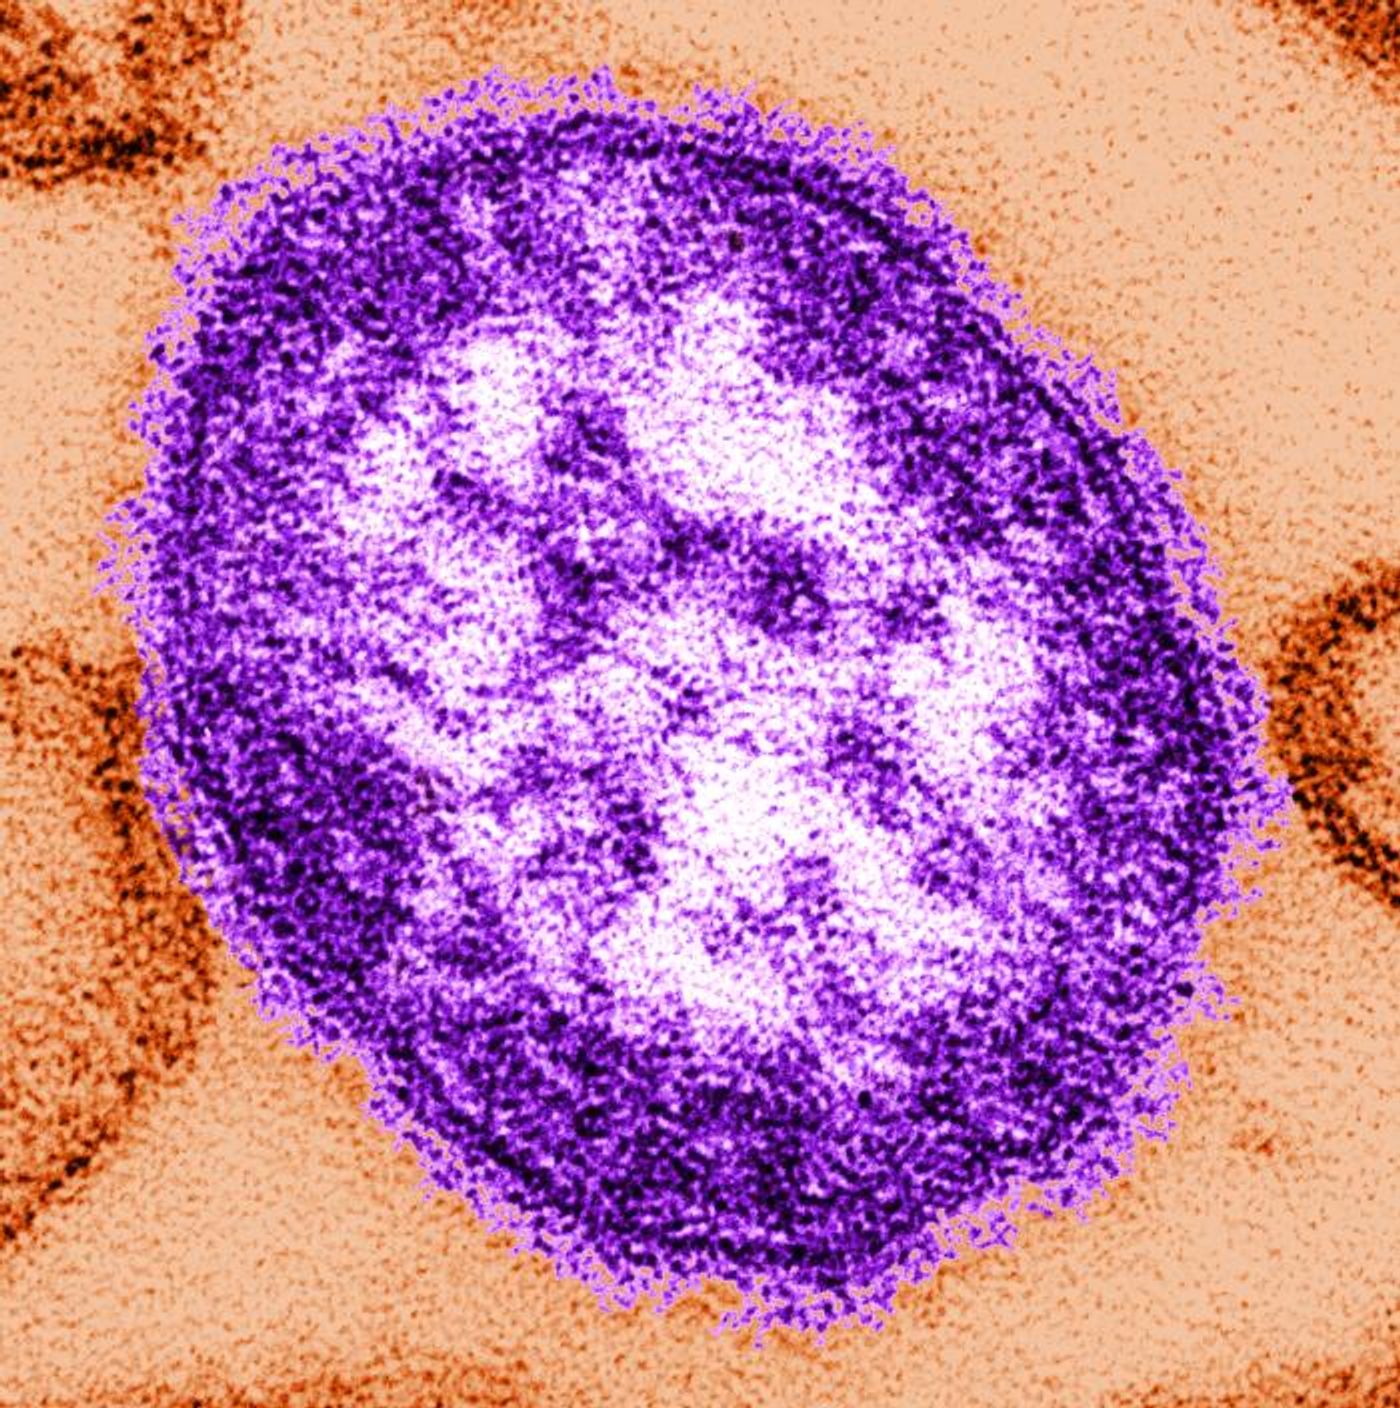 Digitally-colorized, thin-section transmission electron microscopic image of a single measles virus particle, with the viral nucleocapsid situated underneath the viral envelope, surrounded by surface projections. / Credit: CDC/ Cynthia S. Goldsmith; William Bellini, PhD